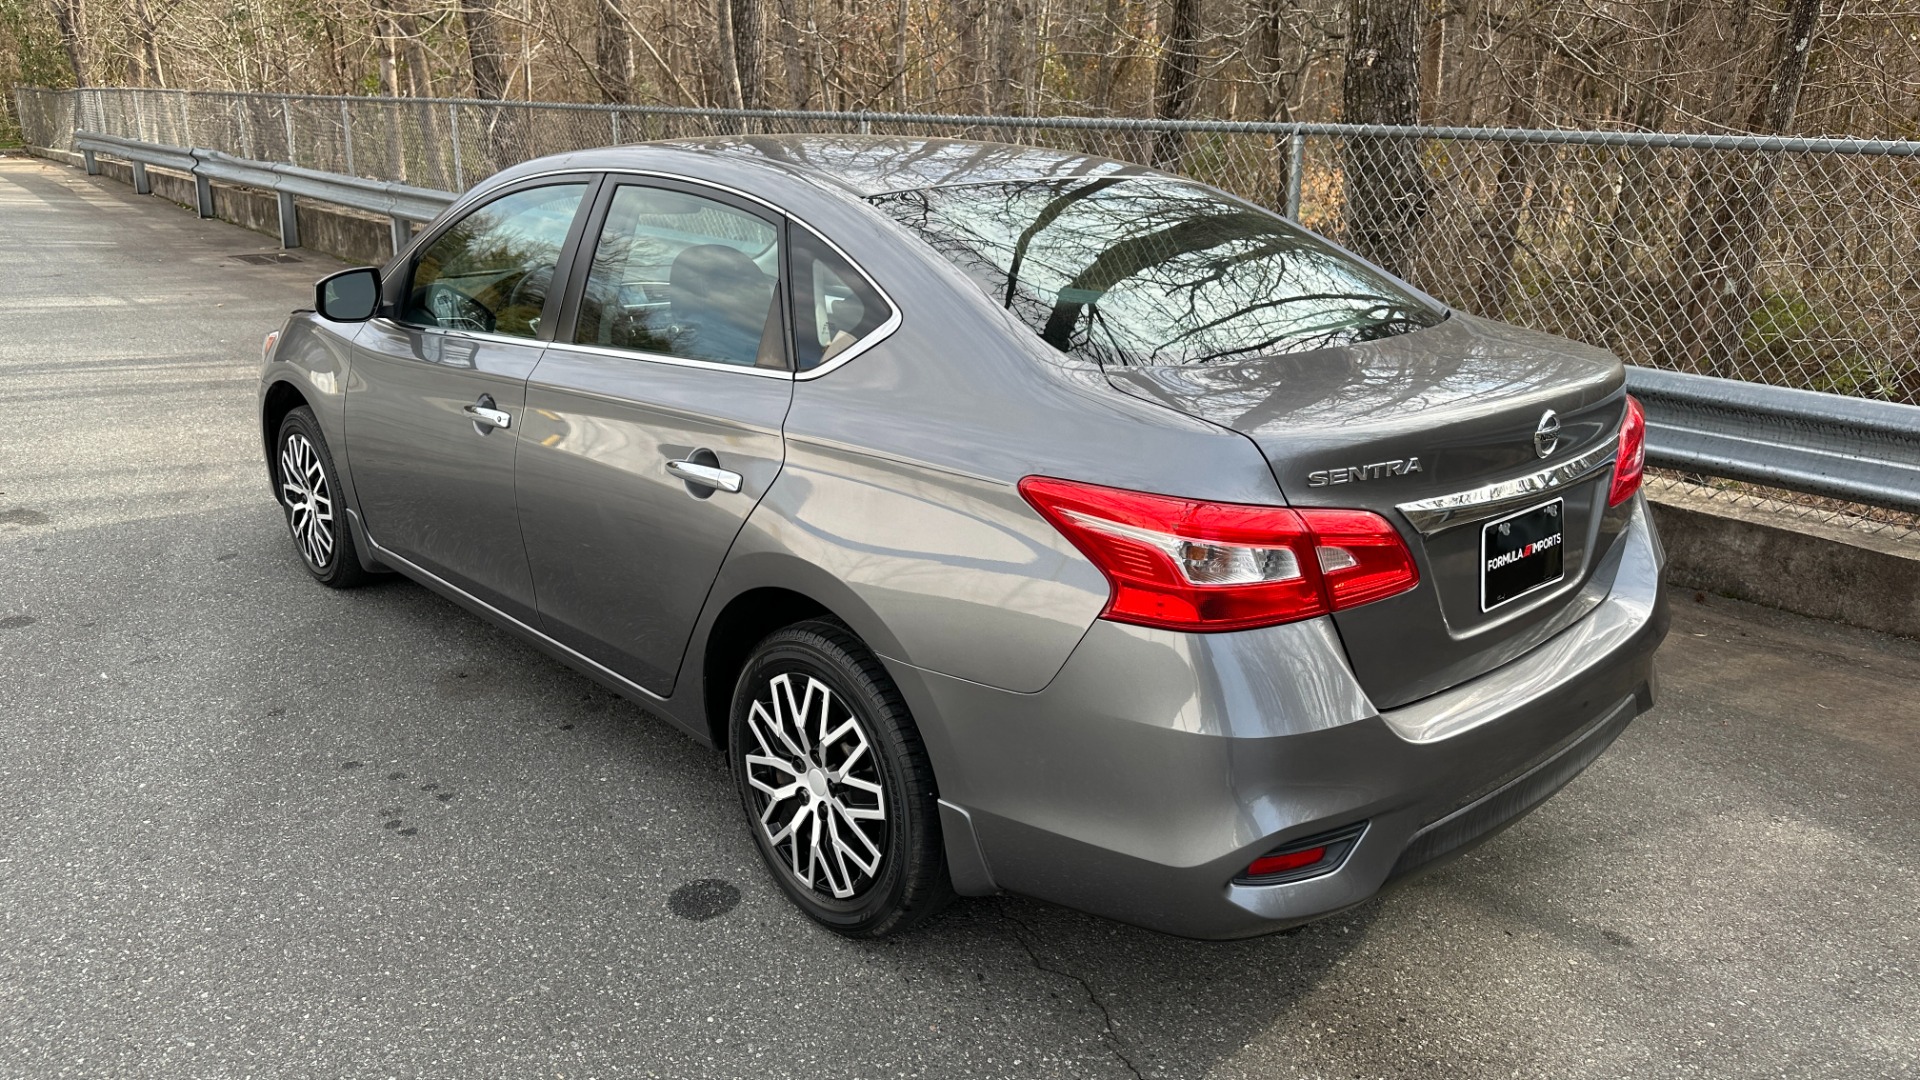 Used 2017 Nissan Sentra S / FRONT WHEEL DRIVE / SPLASH GUARDS / 4CYL ENGINE for sale Sold at Formula Imports in Charlotte NC 28227 8